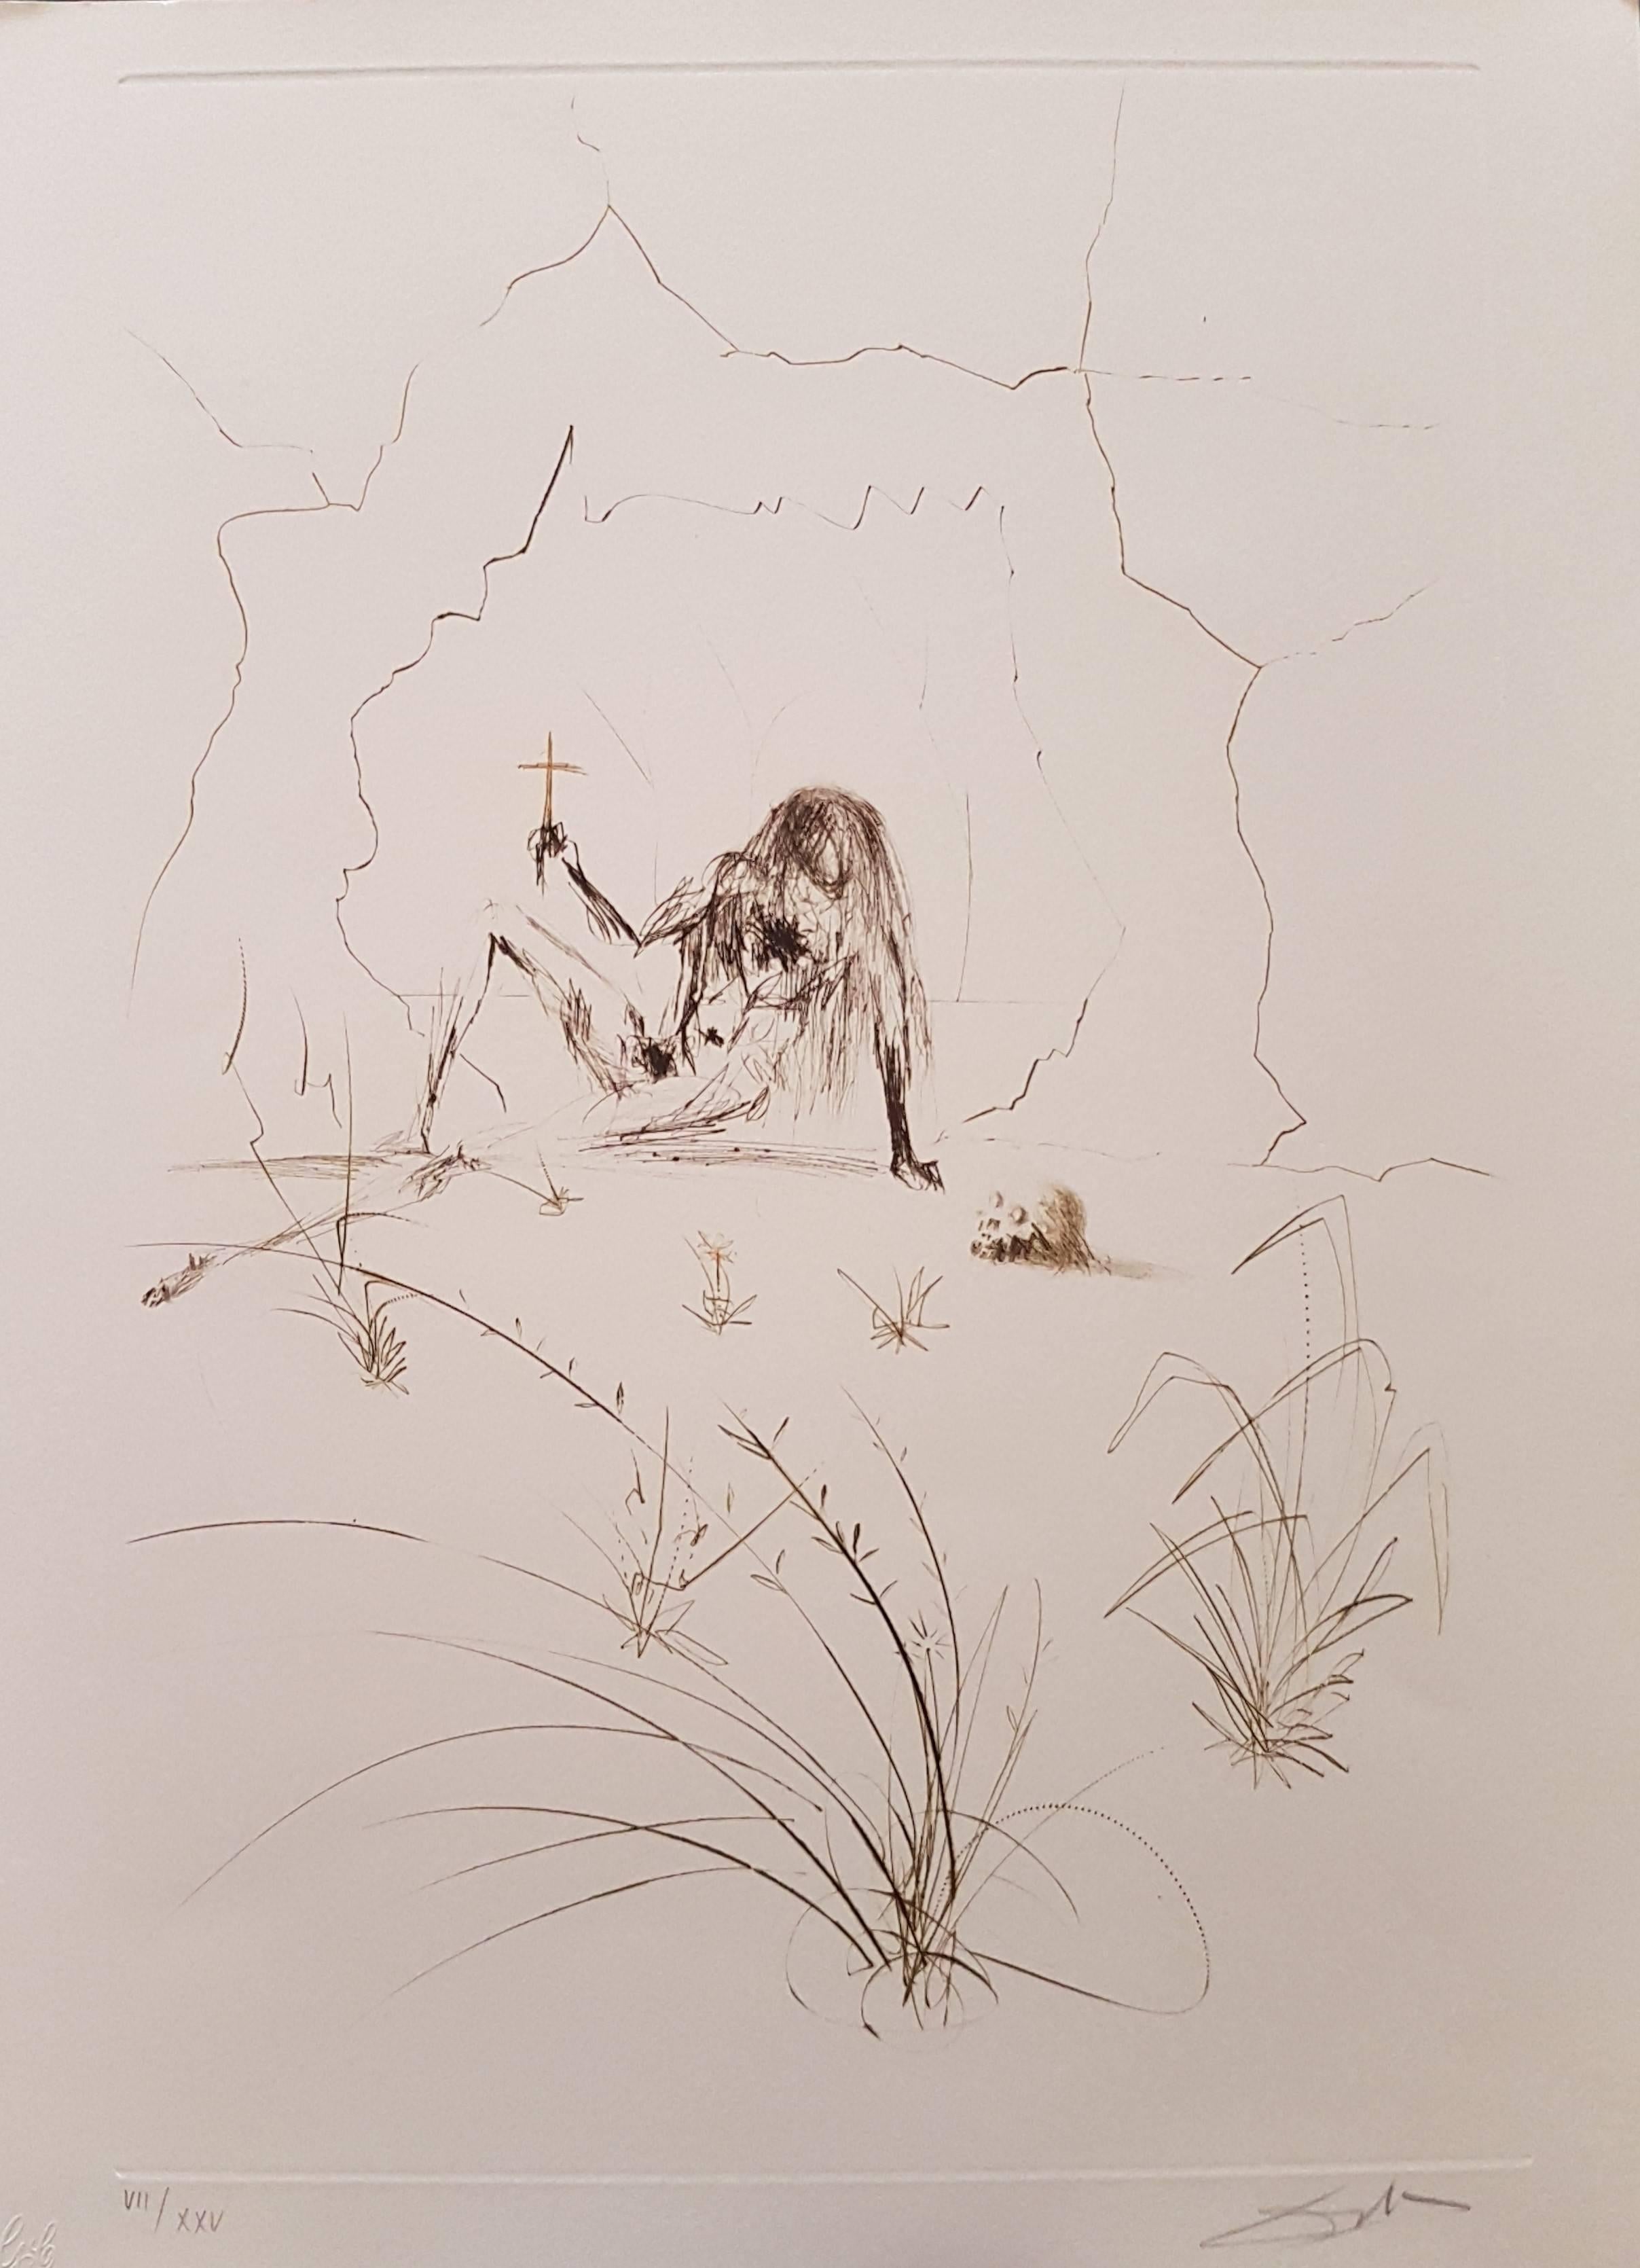 Salvador Dalí Print - Plate from "Tristan and Isolde": Frere Orgin, L'Hermite (Brother Orgin, Hermit)